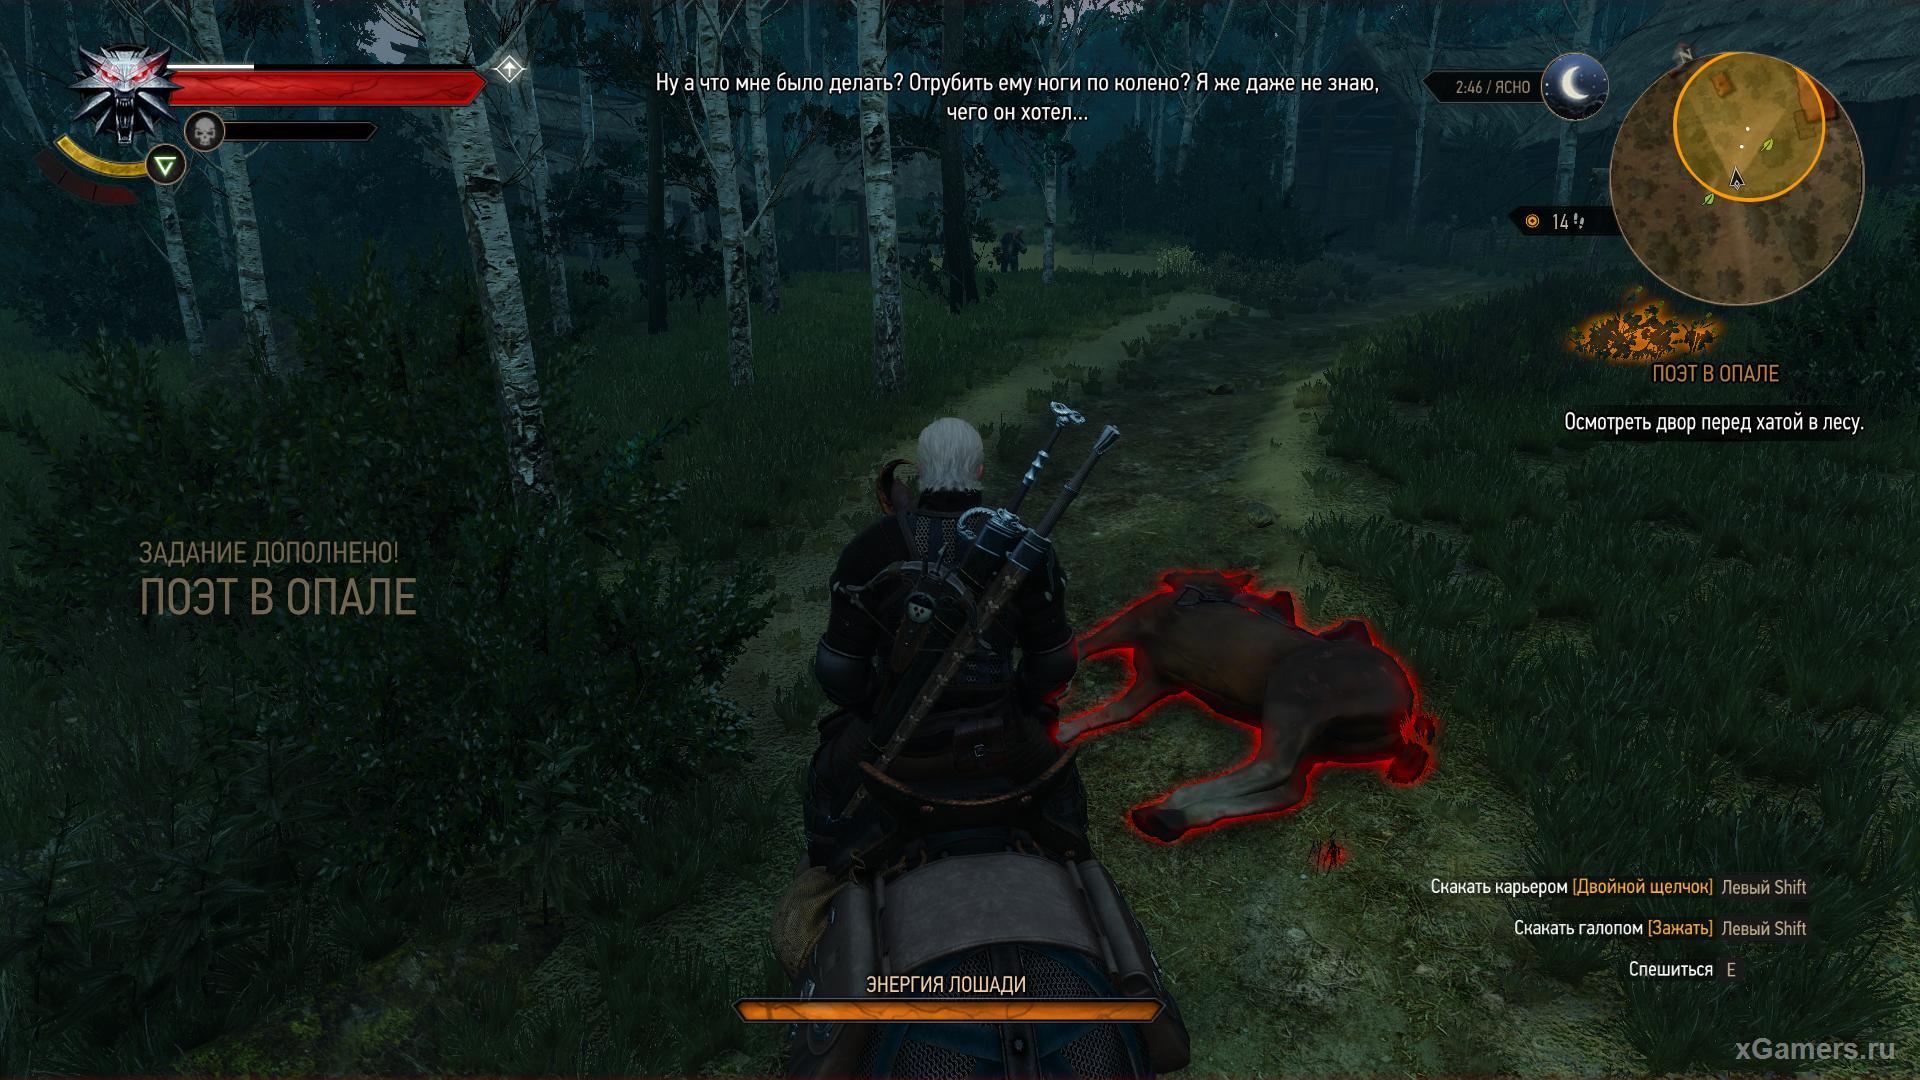 Search for Buttercup in The Witcher 3